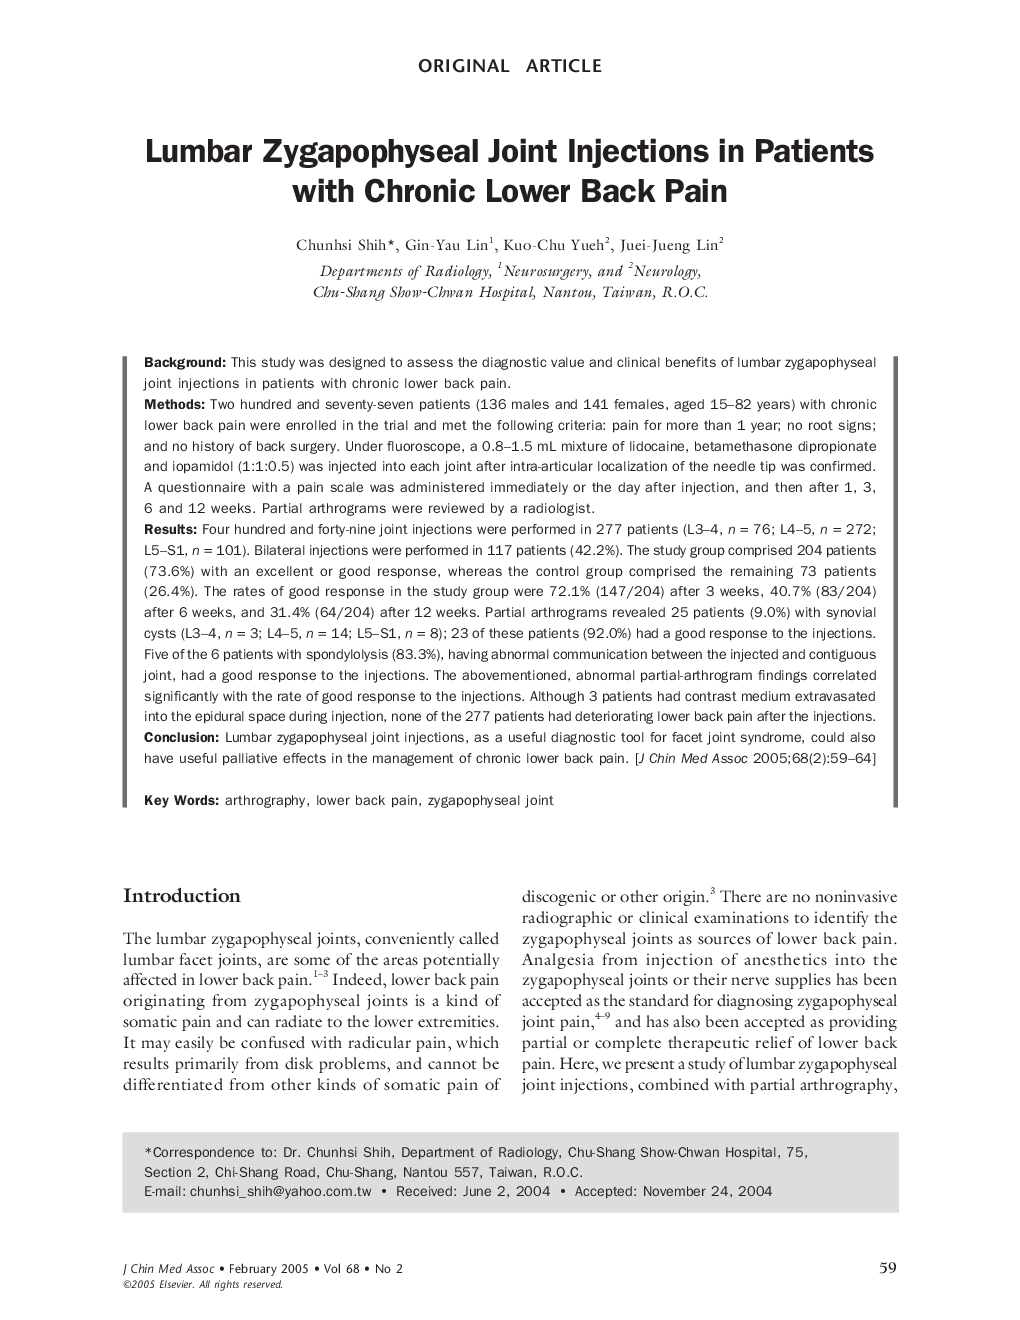 Lumbar Zygapophyseal Joint Injections in Patients with Chronic Lower Back Pain